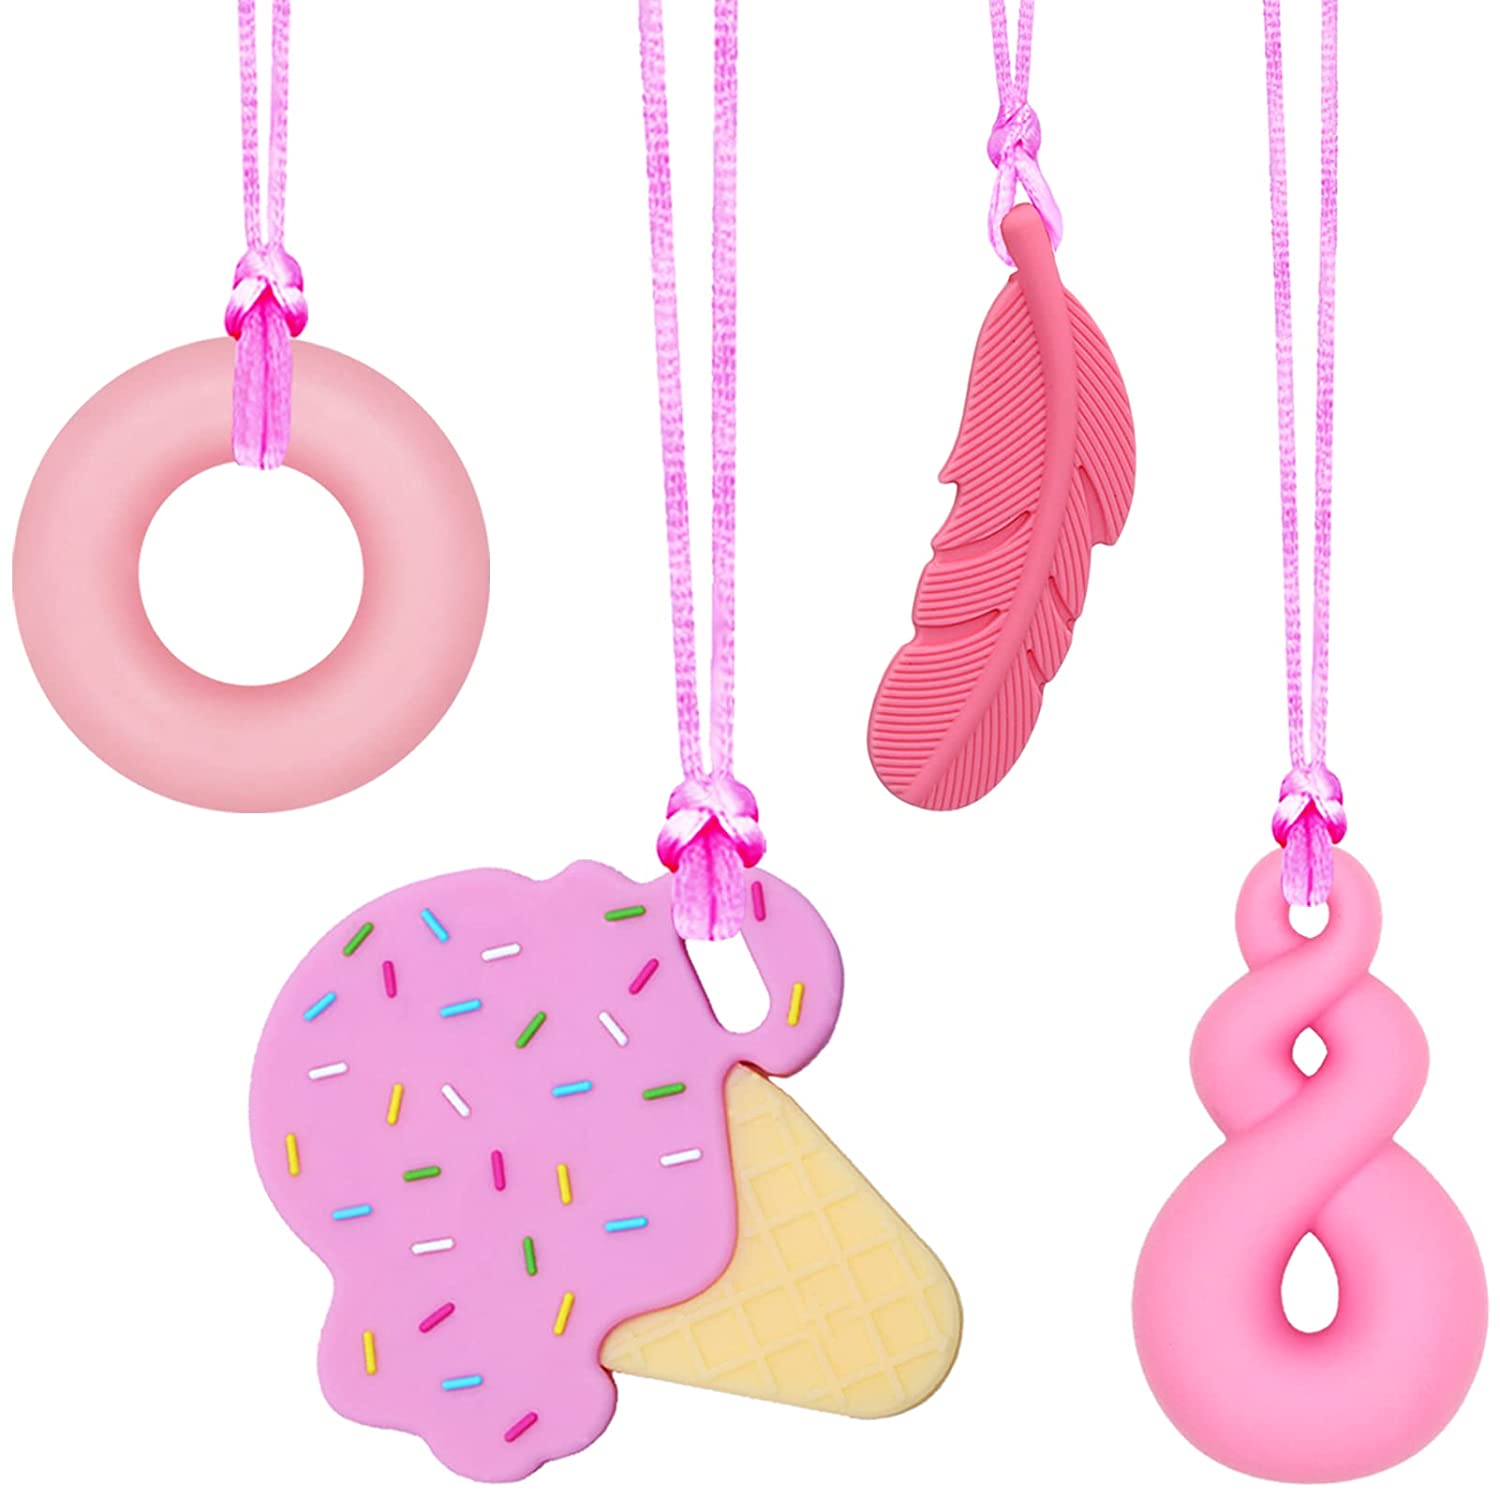 Chew Necklaces for Sensory Girls, 4 Pack Chewy Necklace Sensory Kids chewelry 